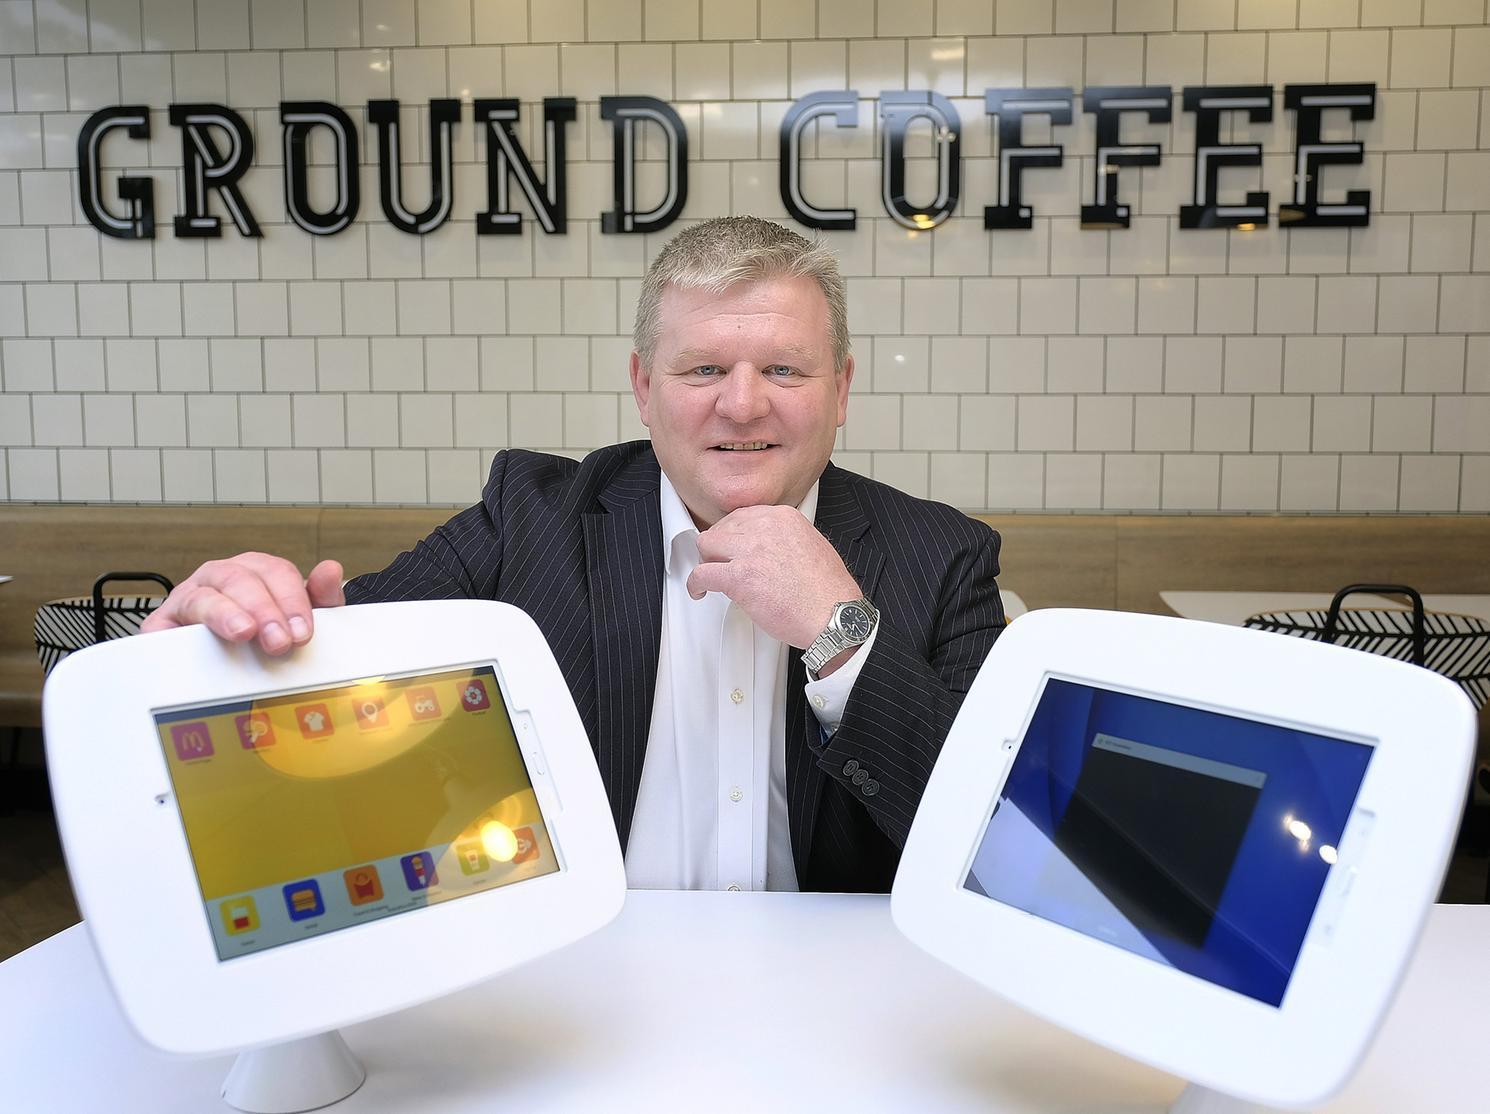 Franchise owner Richard Marcroft shows off the free to use tablets for children.